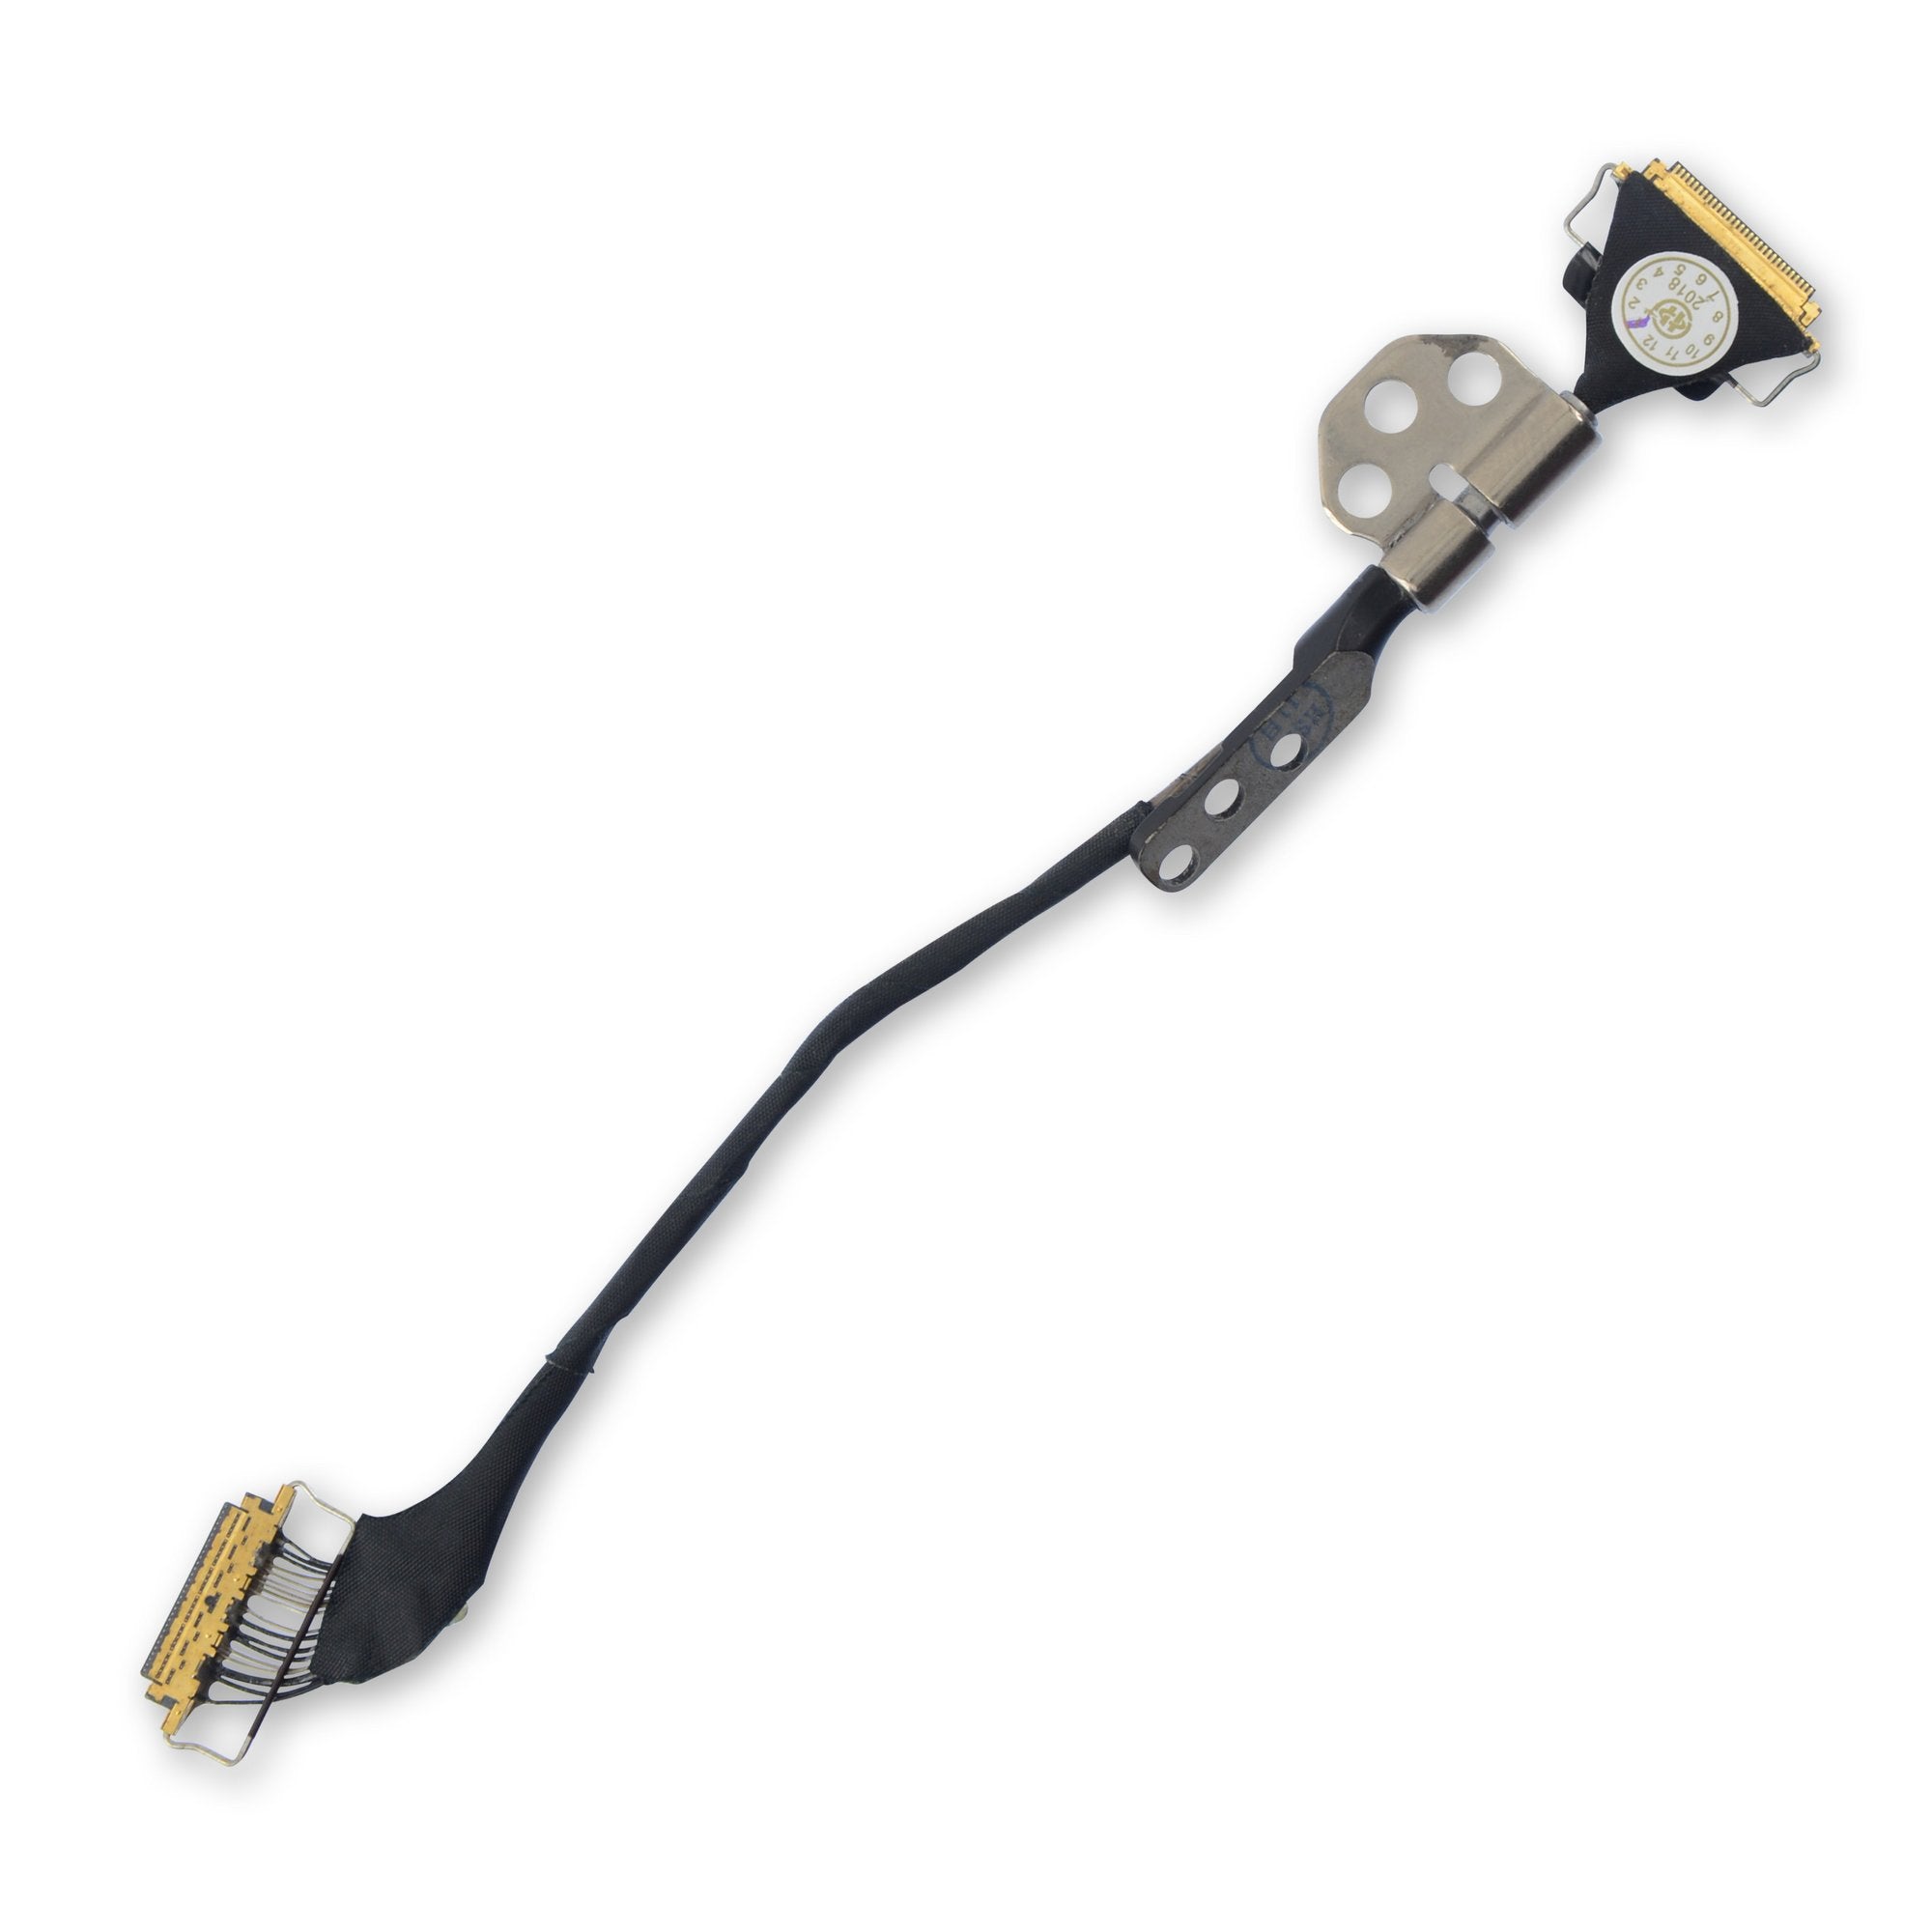 MacBook Air 13" (Late 2010-Mid 2011) Display LVDS Cable